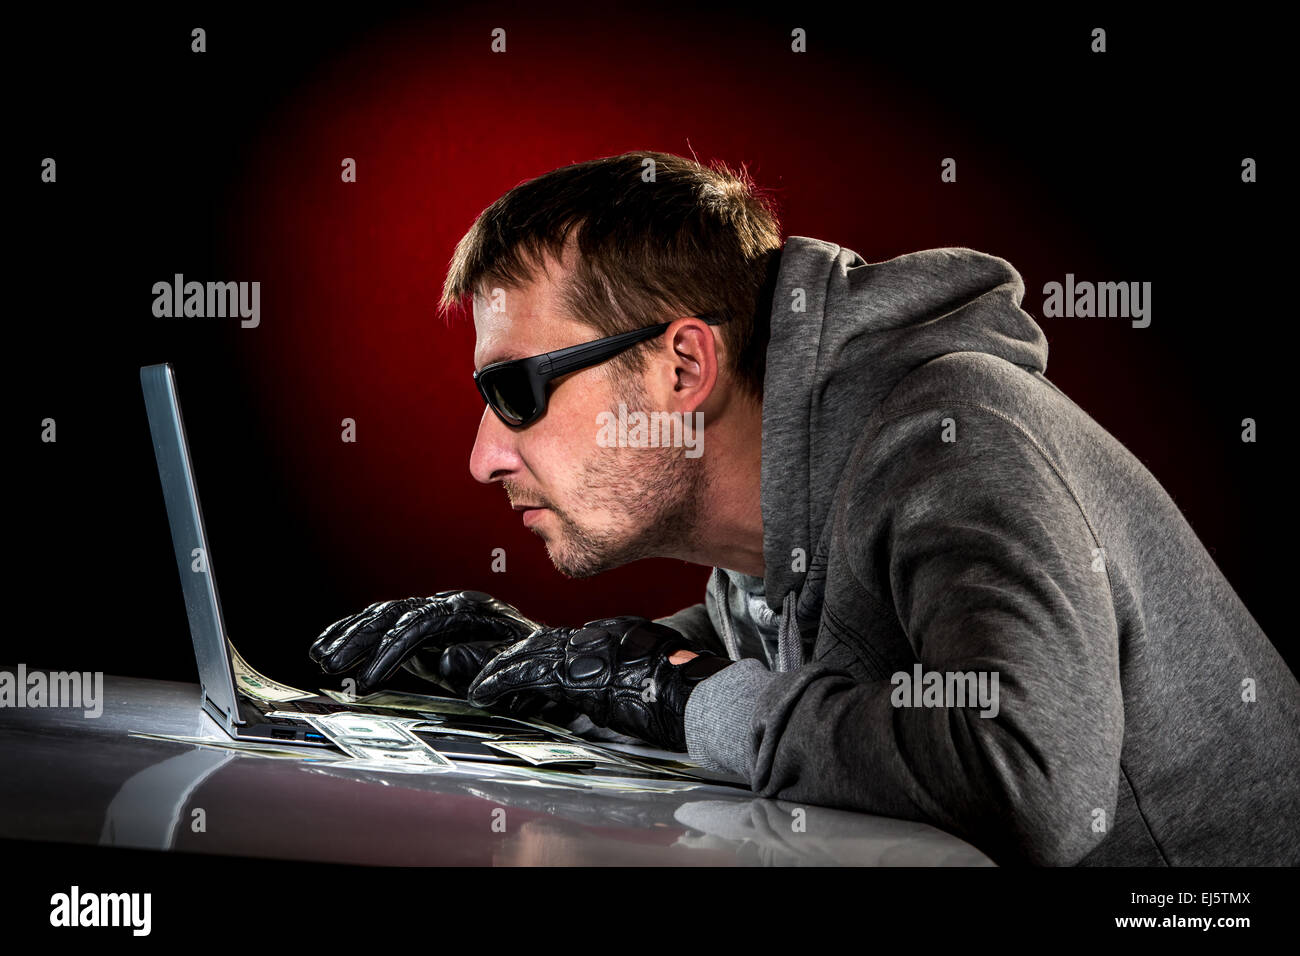 Hacker in a sunglasses with laptop. Stock Photo